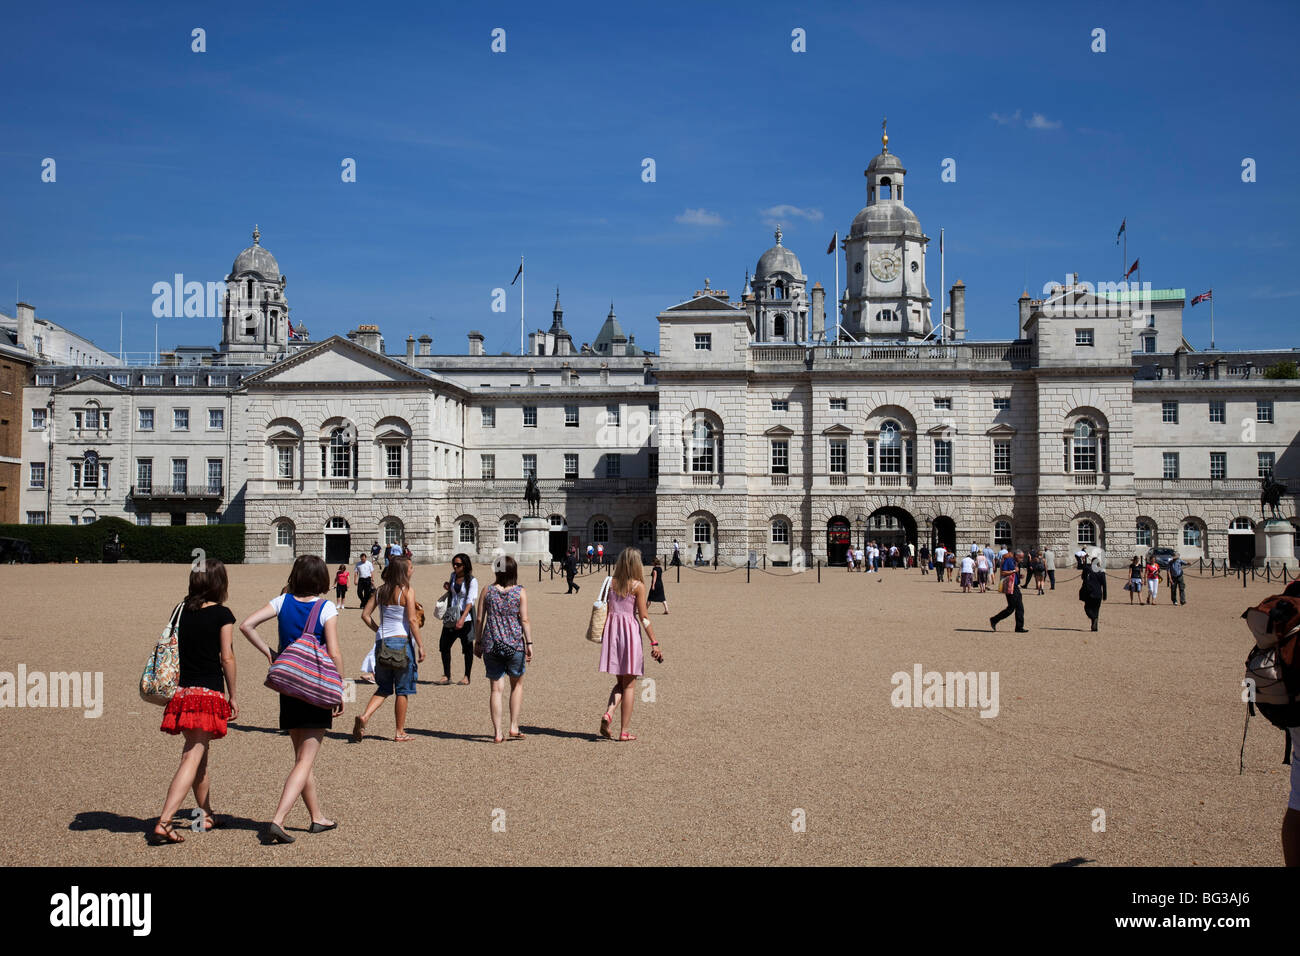 Tourists walk towards the Old Admiralty Building on Horse Guards Parade in St James', central London. Stock Photo